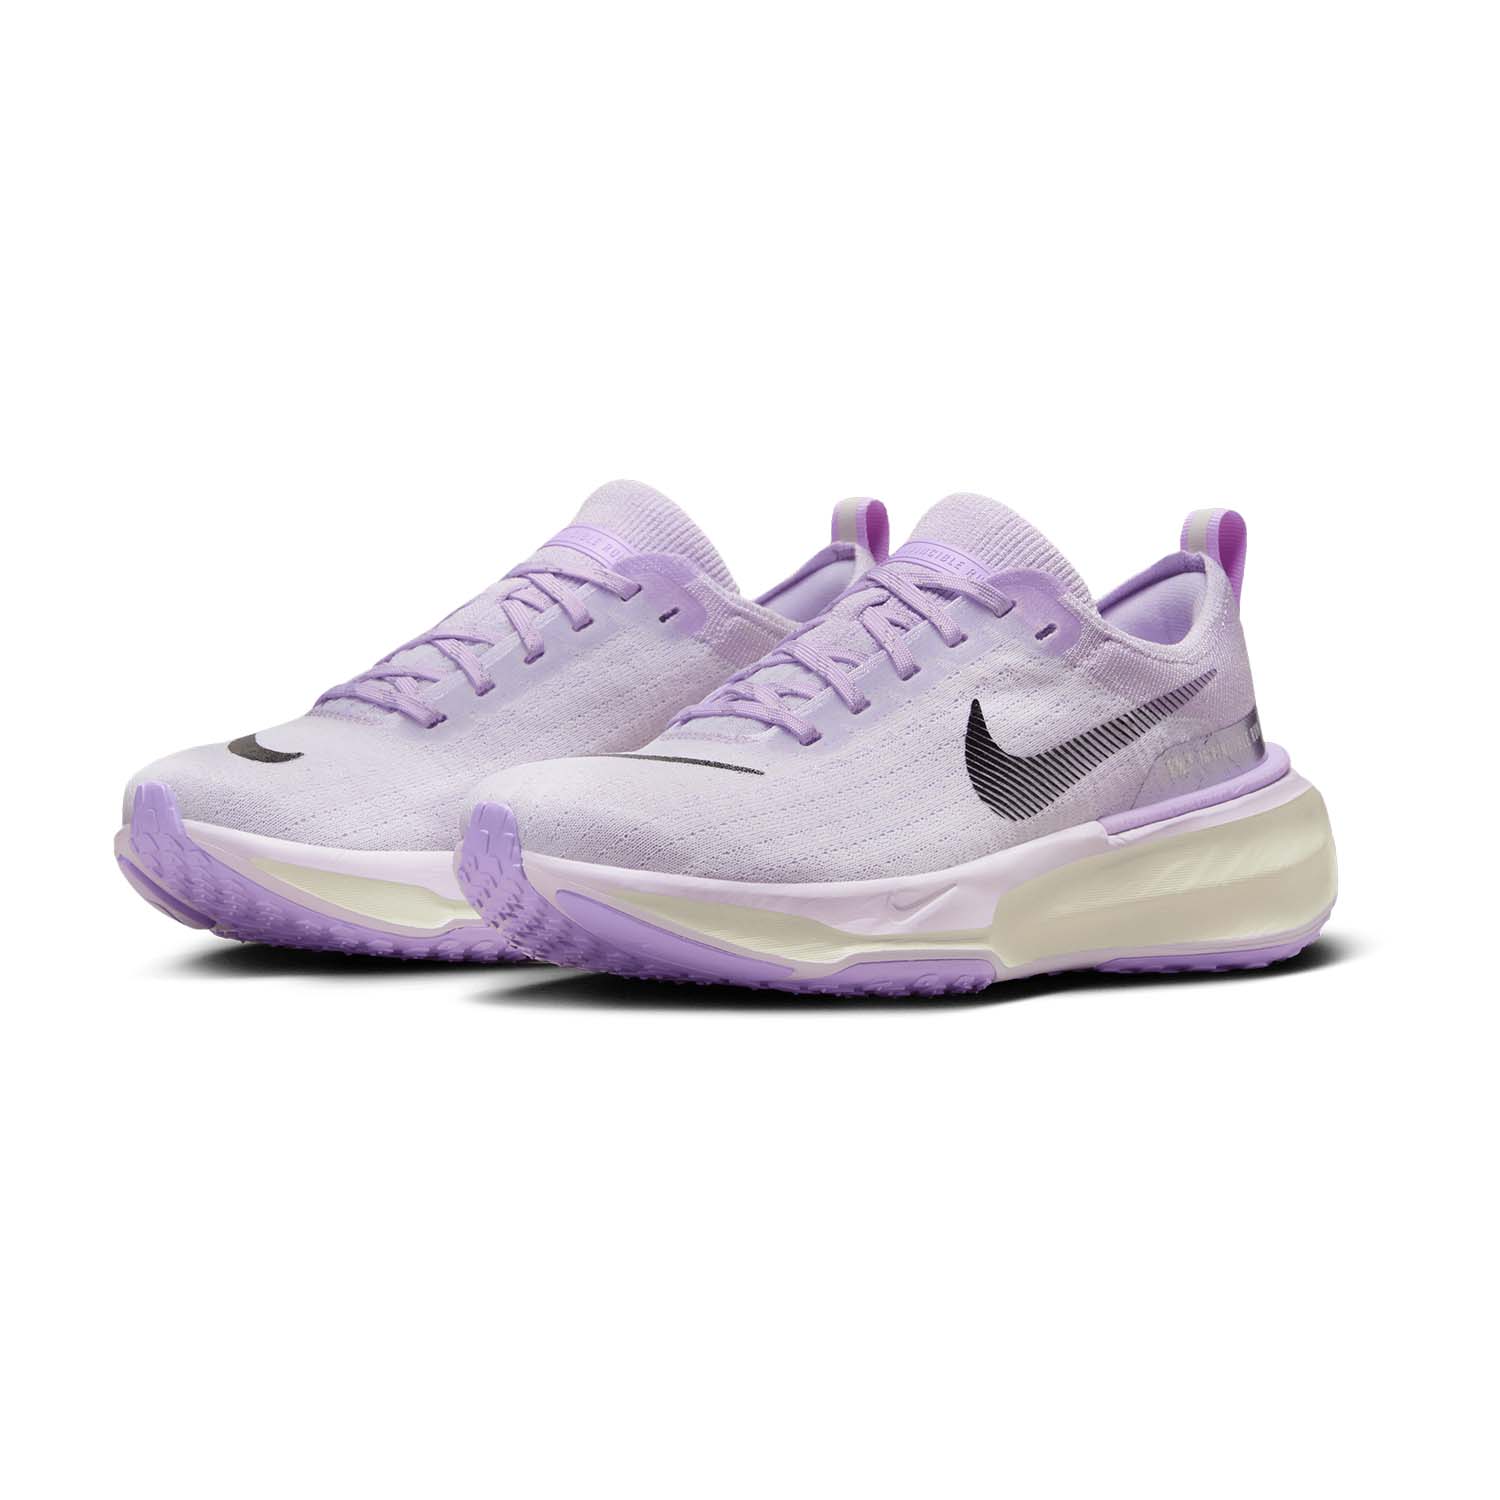 Nike Zoomx Invincible Run Flyknit 3 - Barely Grape/Black/Lilac Bloom/Sail